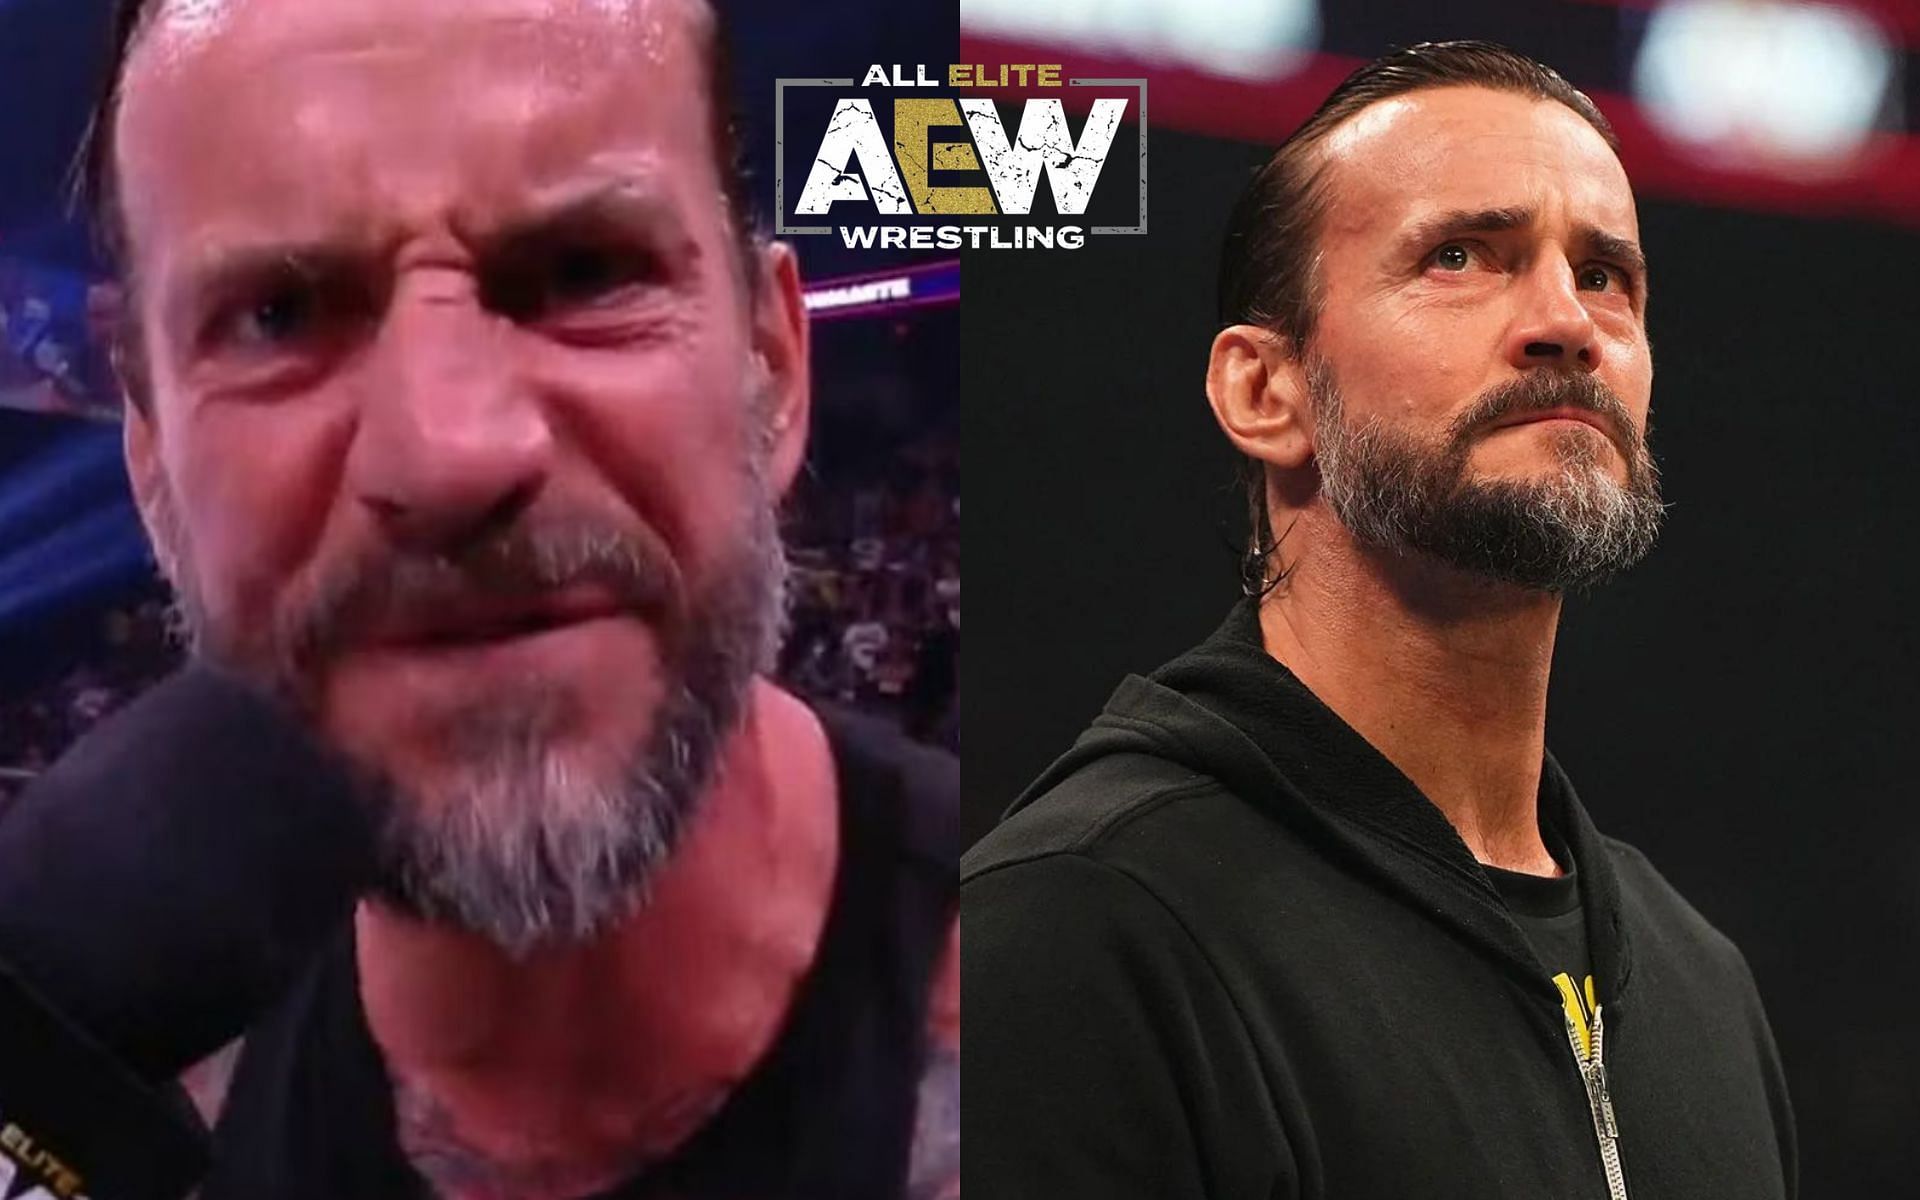 CM Punk recently celebrated his one-year anniversary with AEW